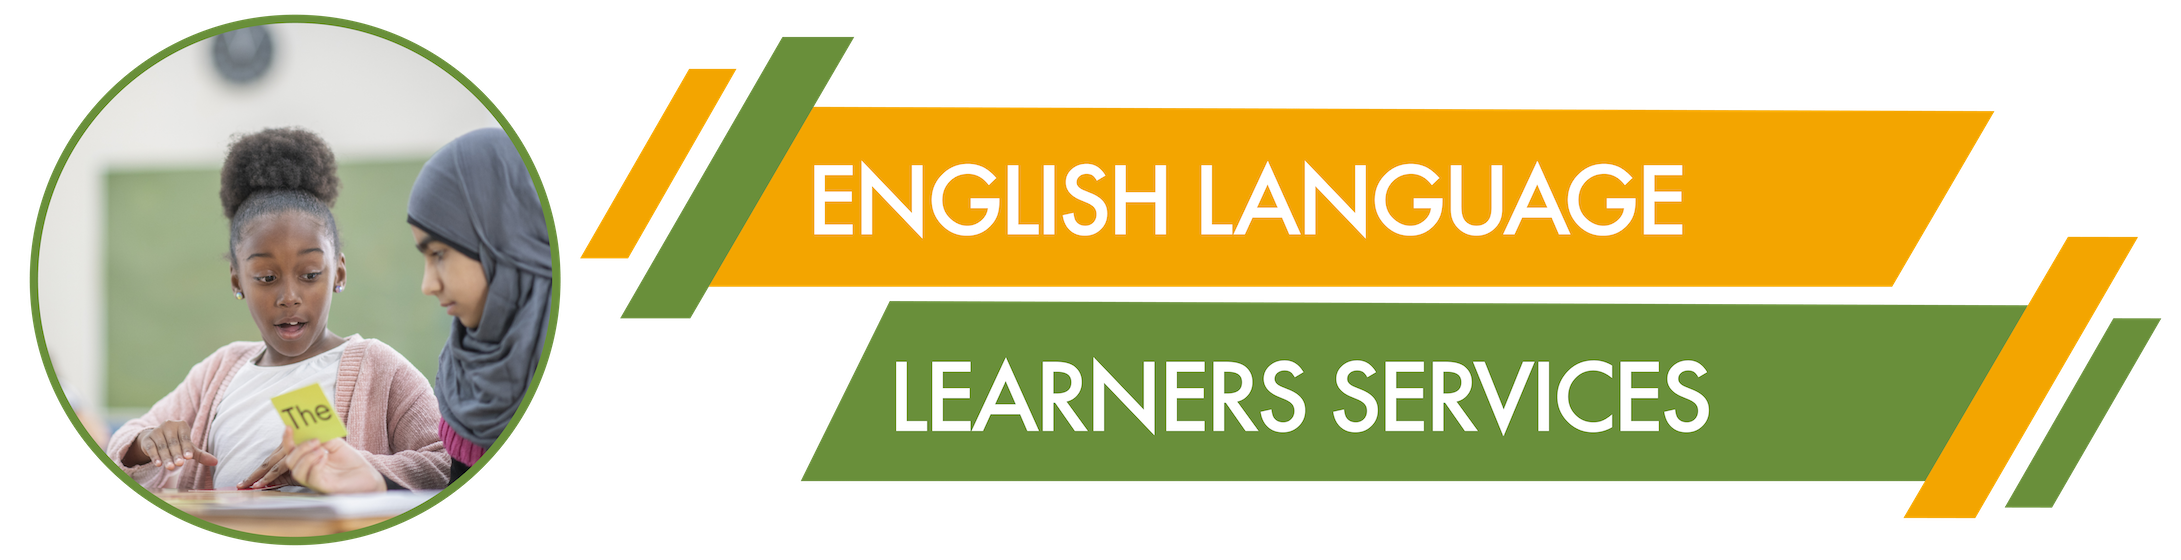 English Language Learners Services Banner